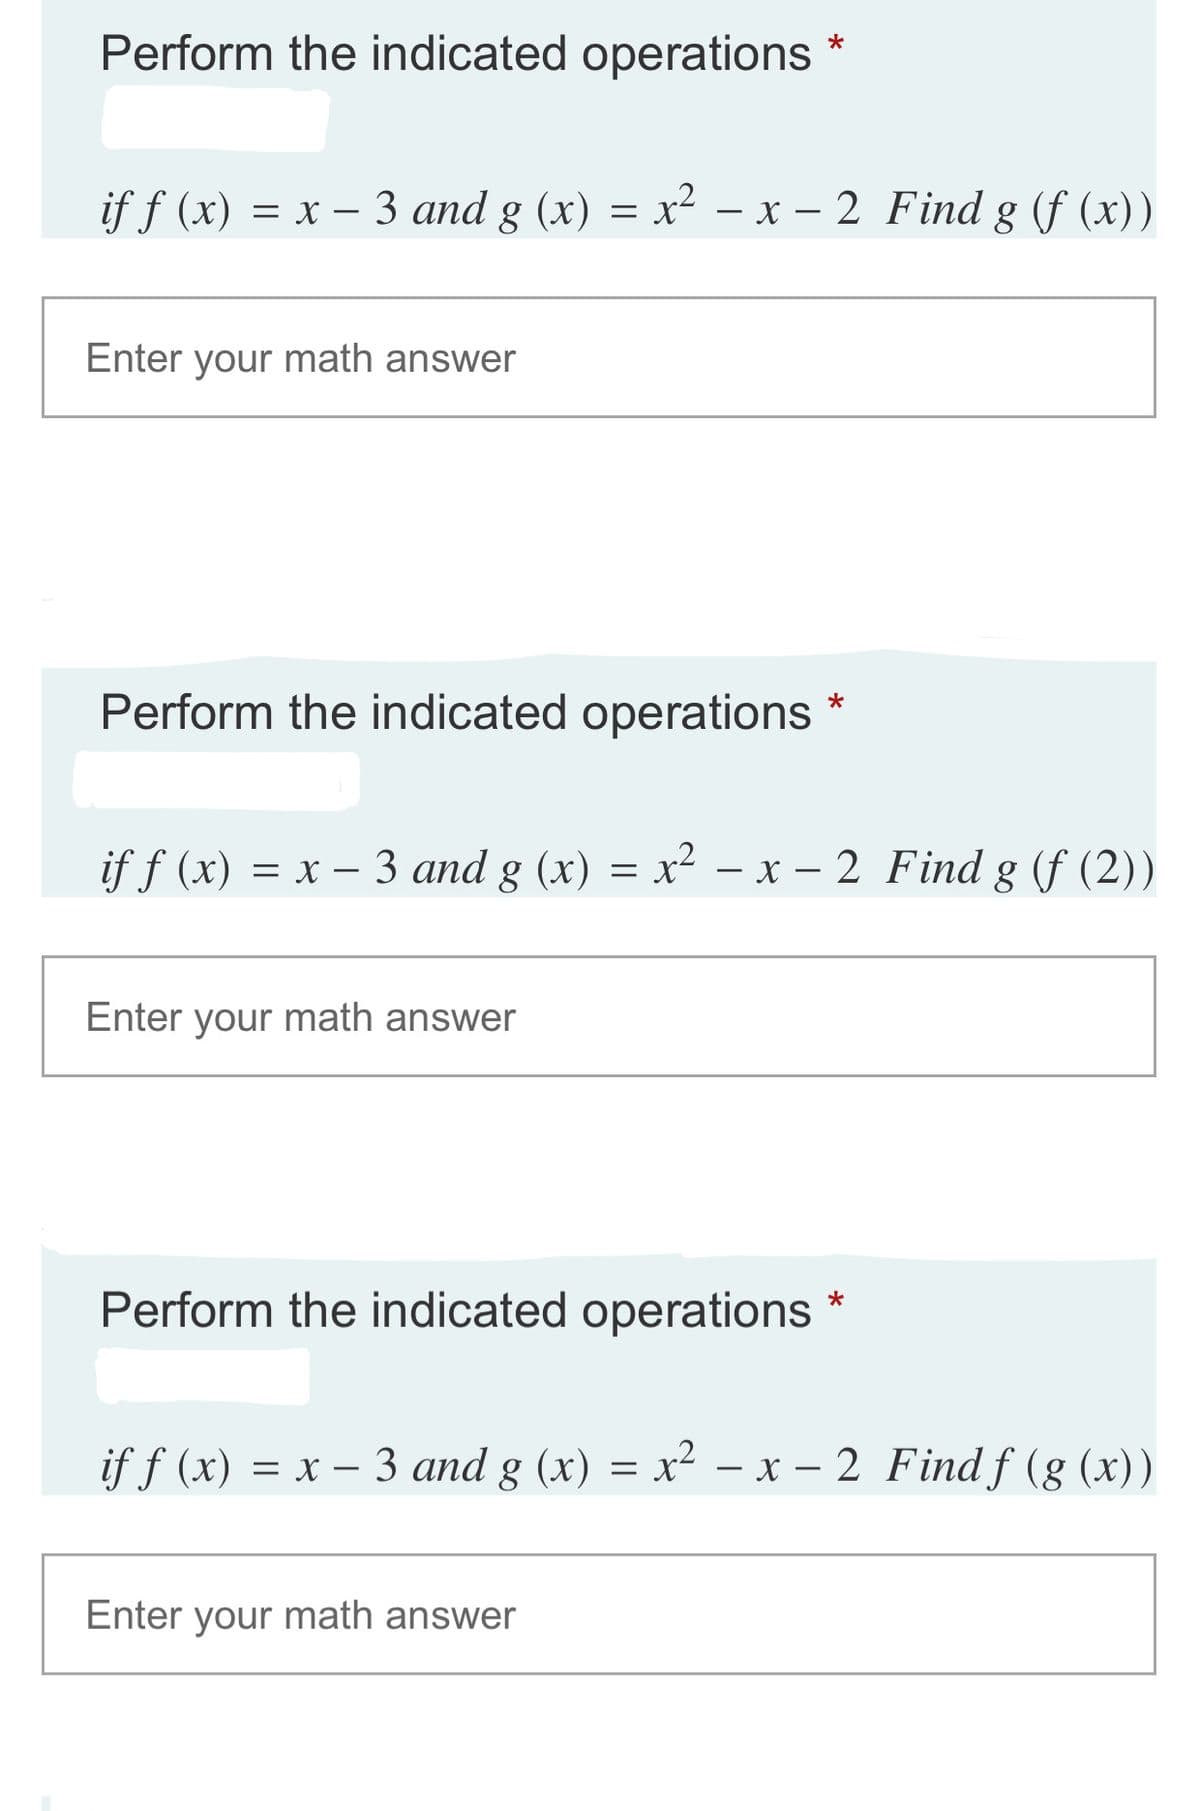 Perform the indicated operations *
if f (x) = x – 3 and g (x) = x² – x – 2 Find g (f (x))
Enter your math answer
Perform the indicated operations
= x - 3 and g (x) = x² – x – 2 Find g (f (2))
Enter your math answer
Perform the indicated operations
if f (x) = x – 3 and g (x) = x² – x – 2 Find f (g (x))
Enter your math answer
